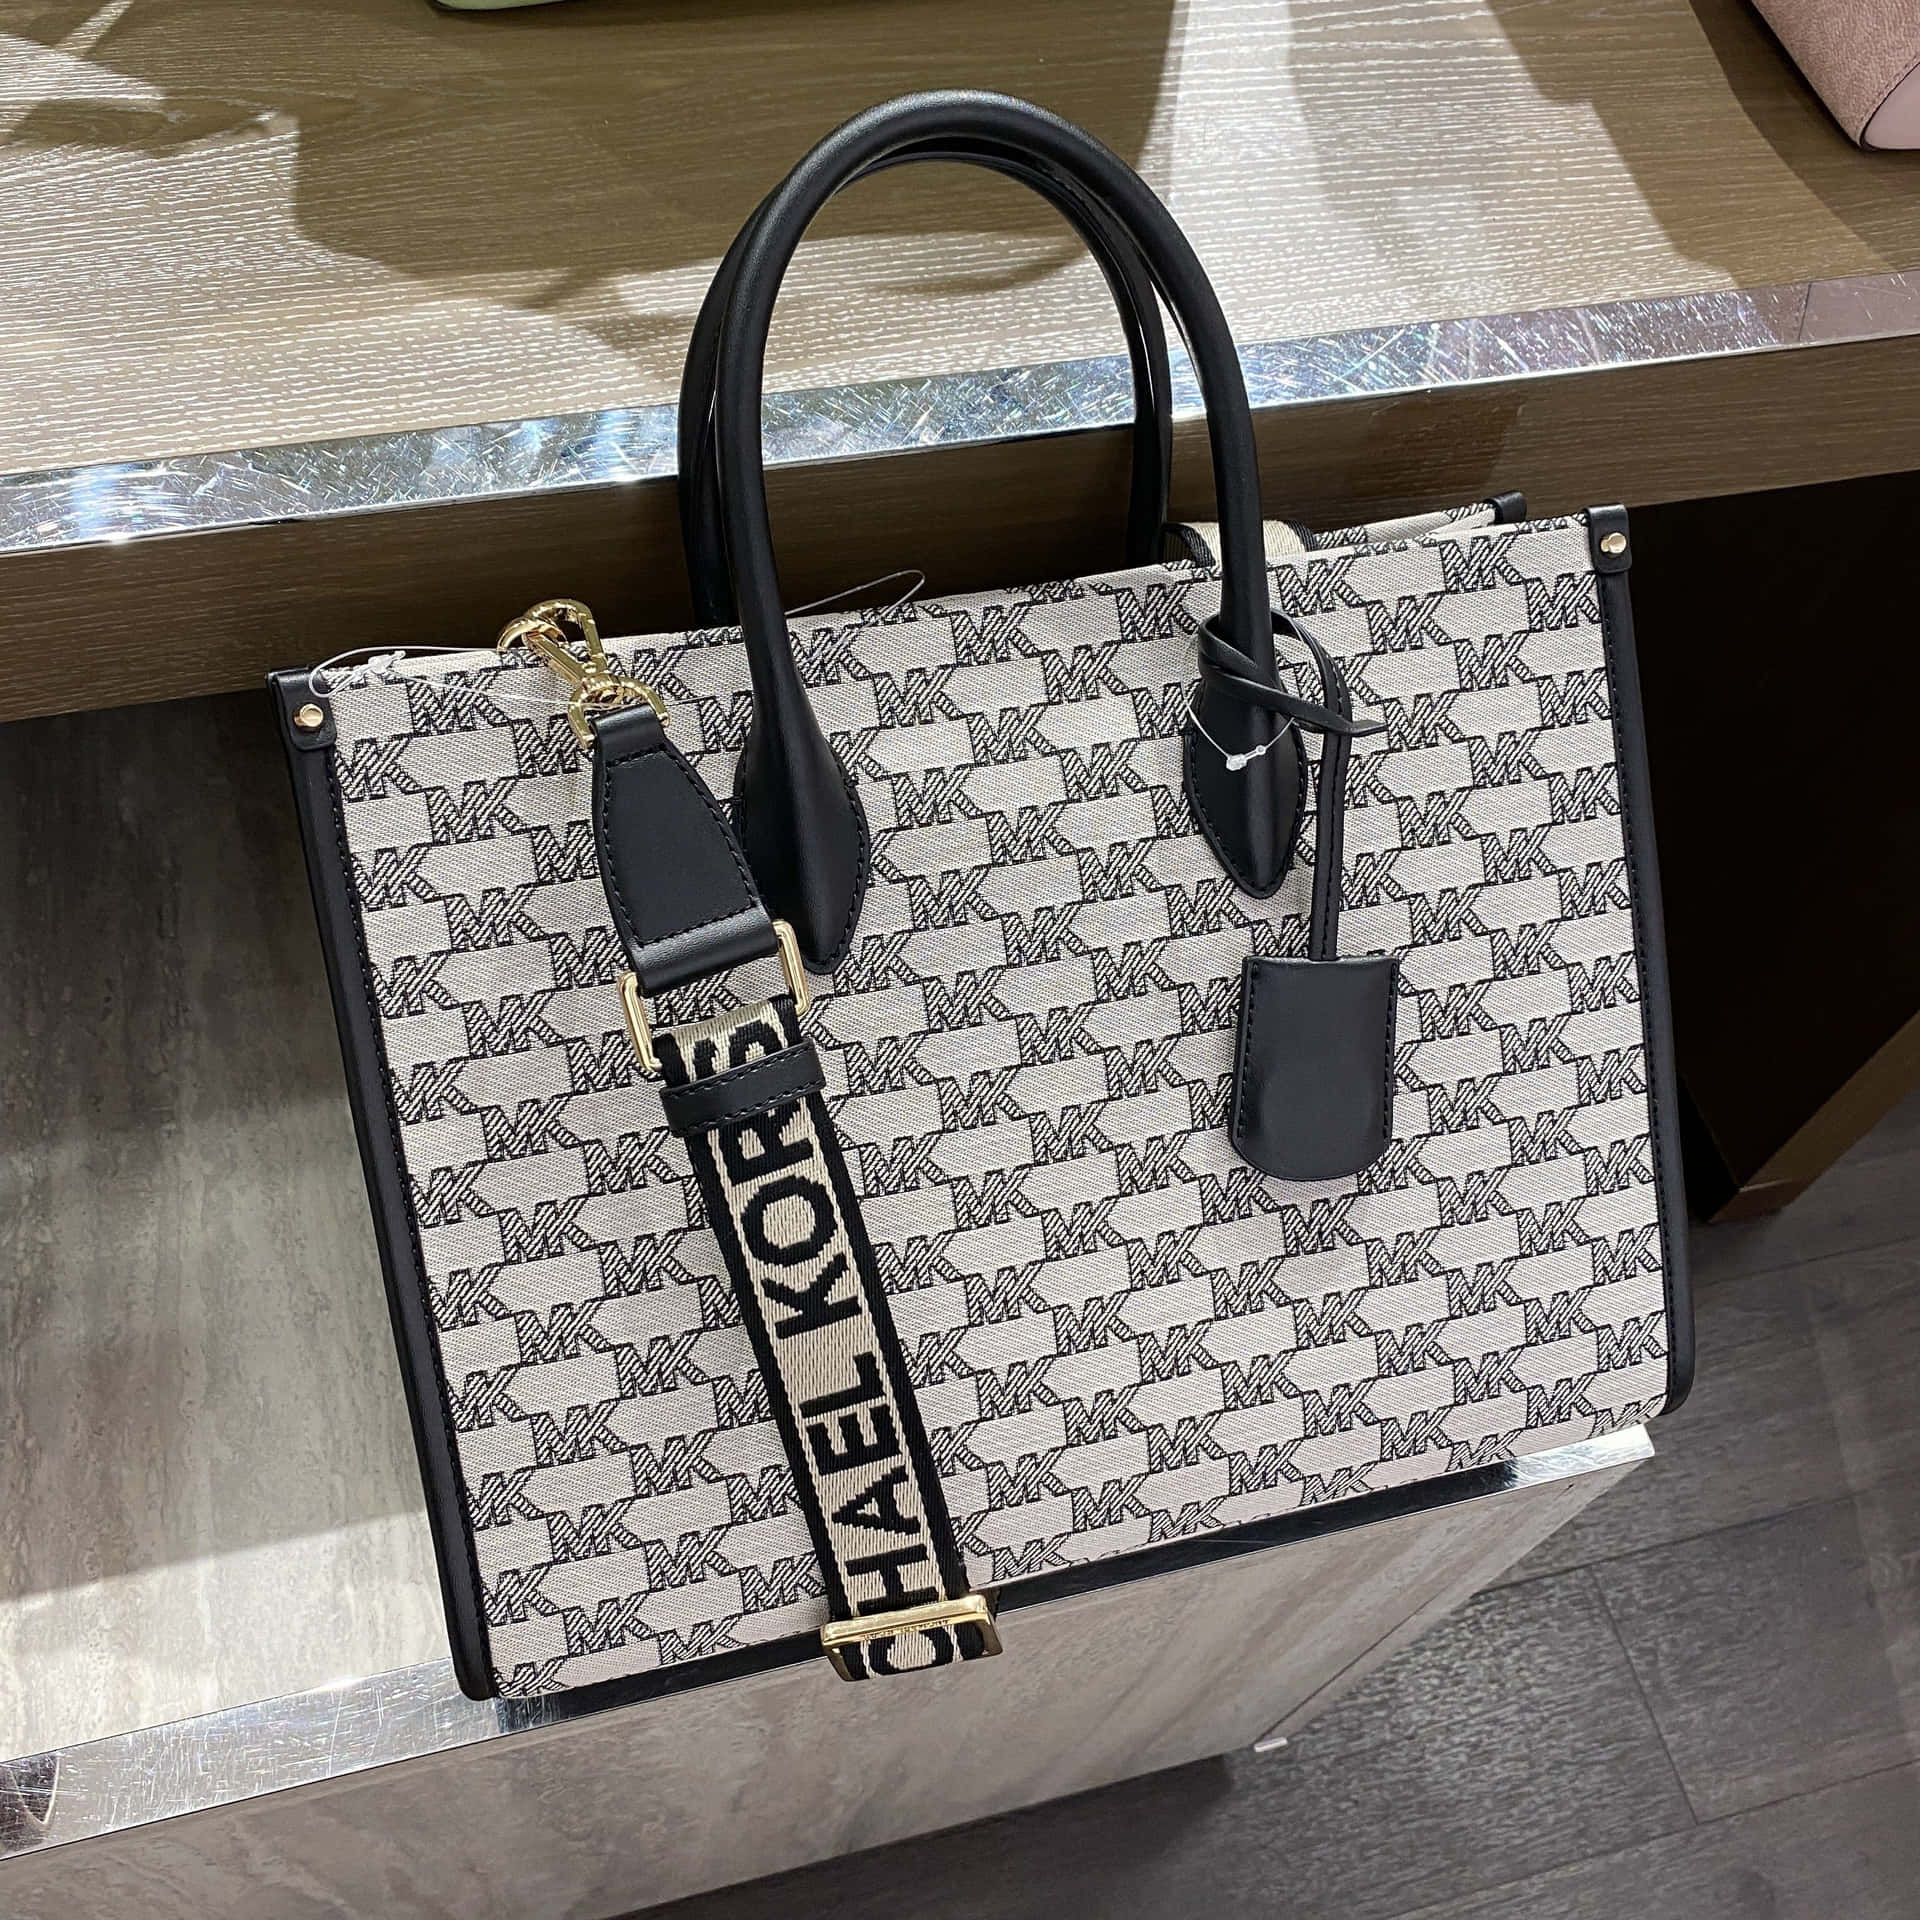 Download Add Refinement and Luxury to Your Look with Michael Kors ...